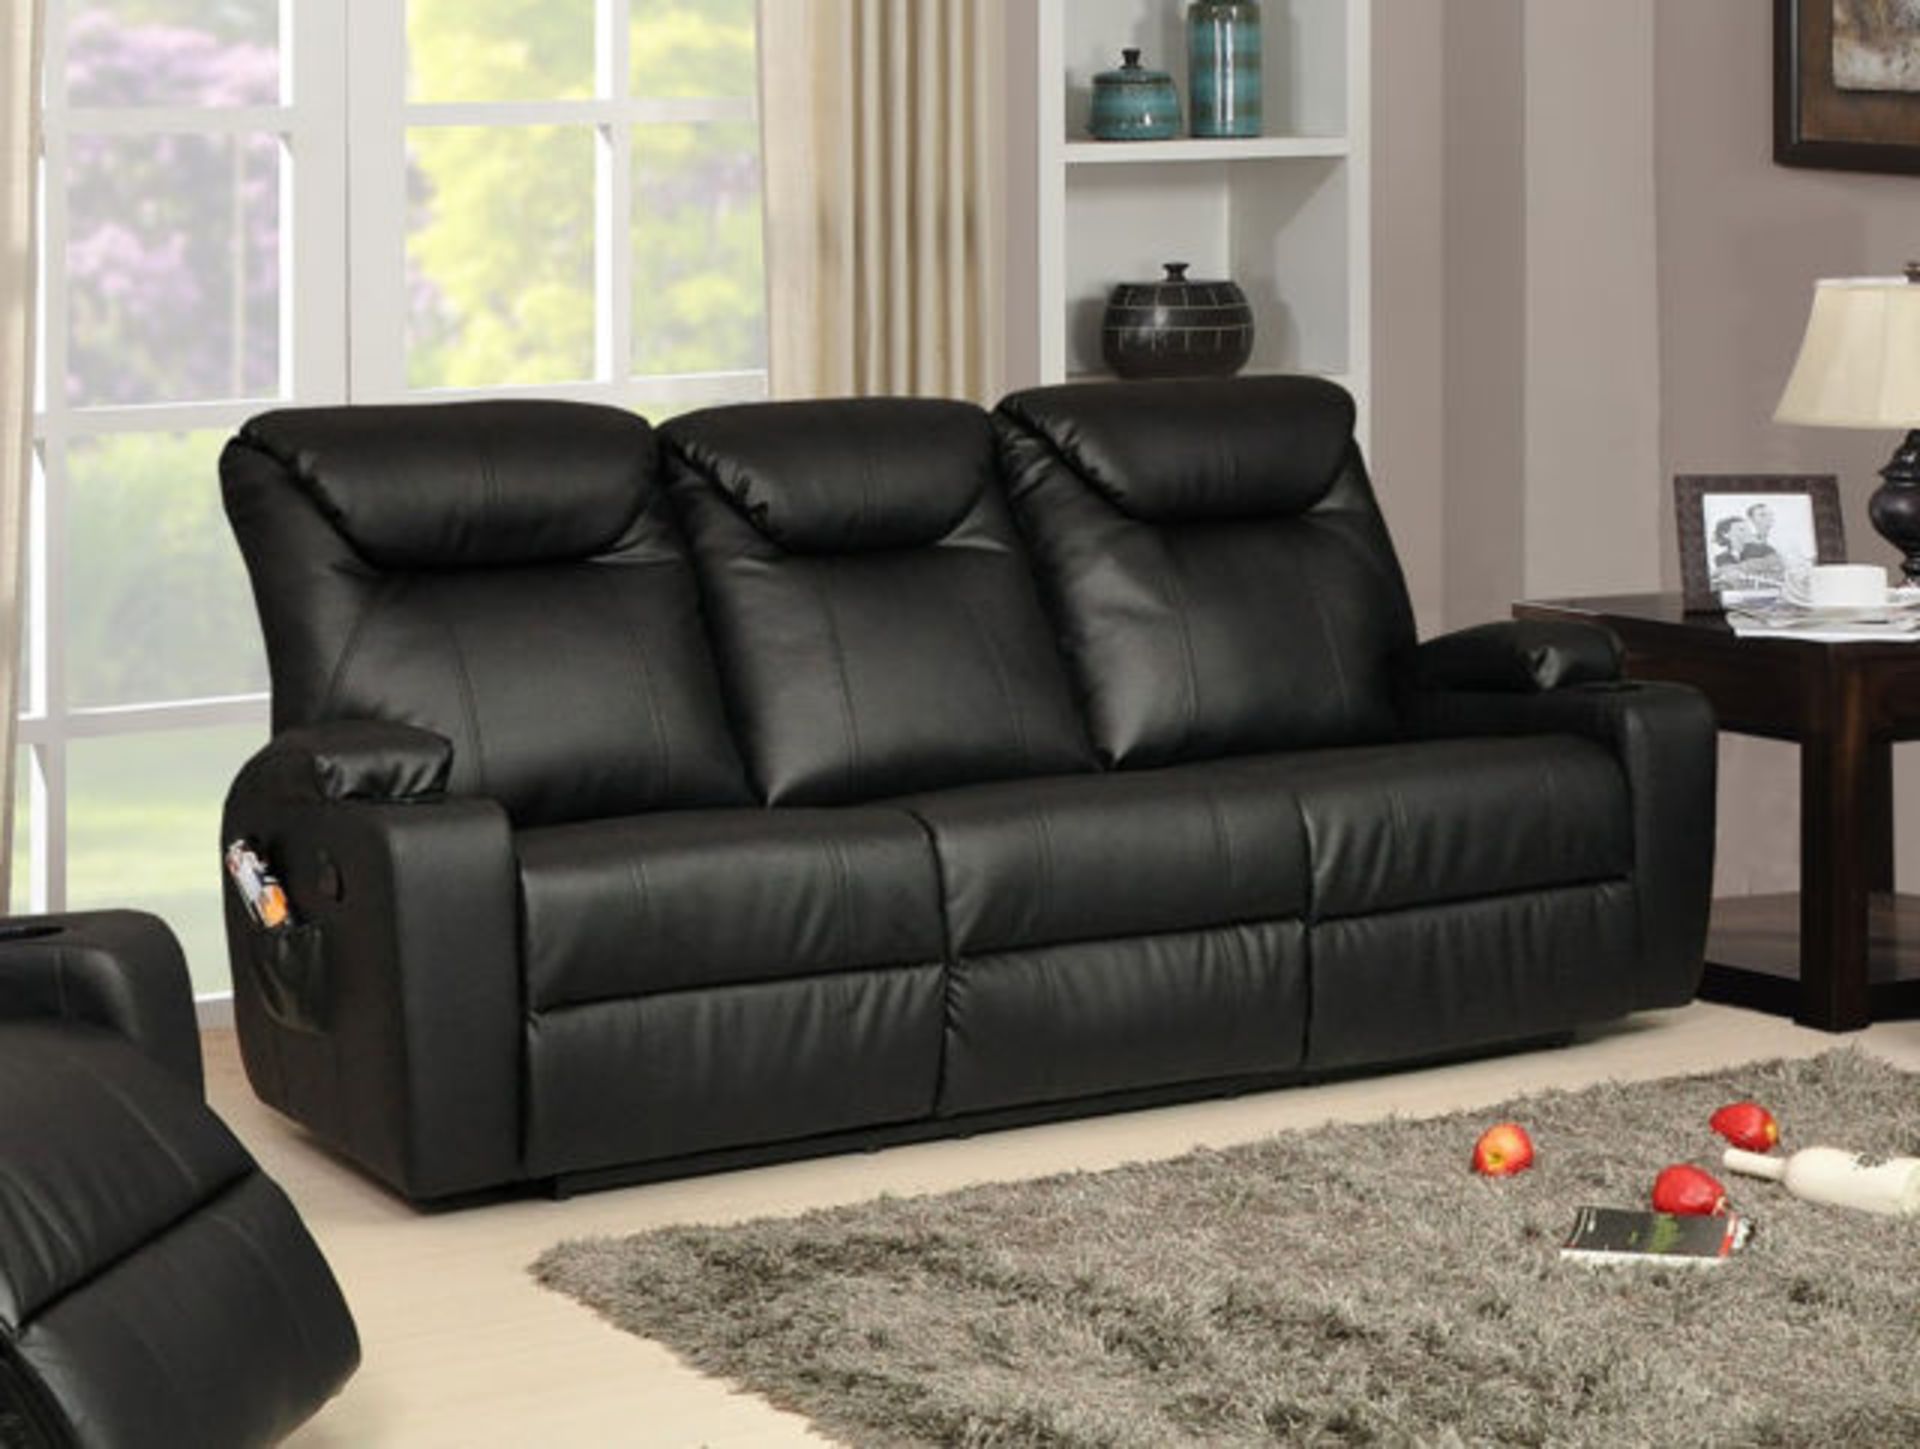 Brand New Boxed 3 Seater Plus 2 Seater Lazyboy Black Leather Manual Reclining Sofas - Image 2 of 2